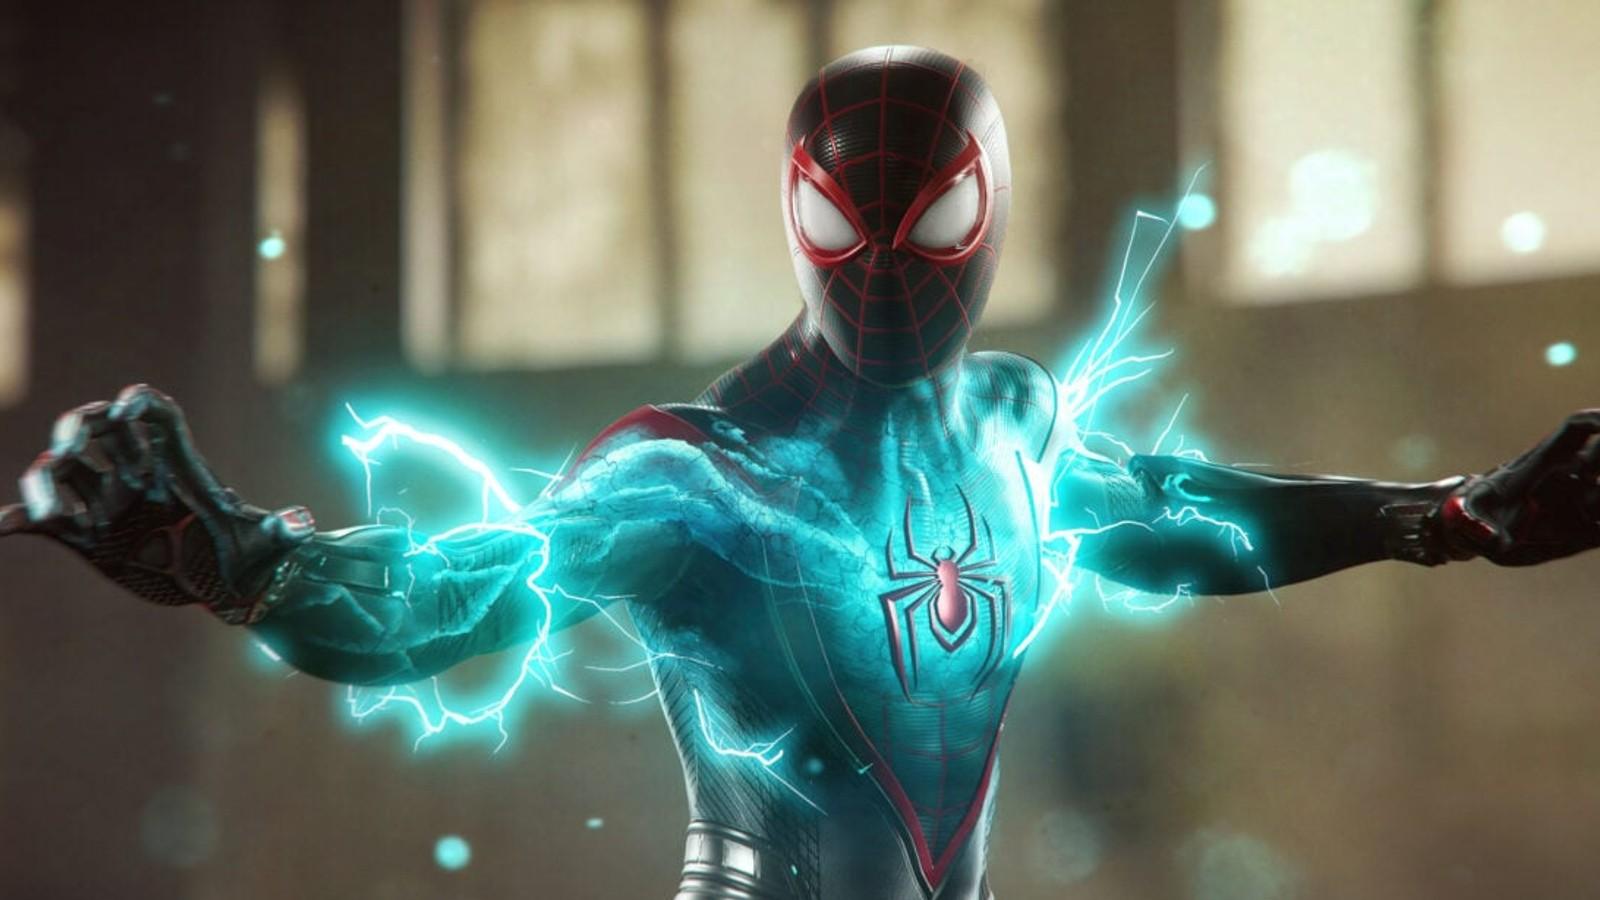 An image of Miles Morales in Marvel's Spider-Man 2.